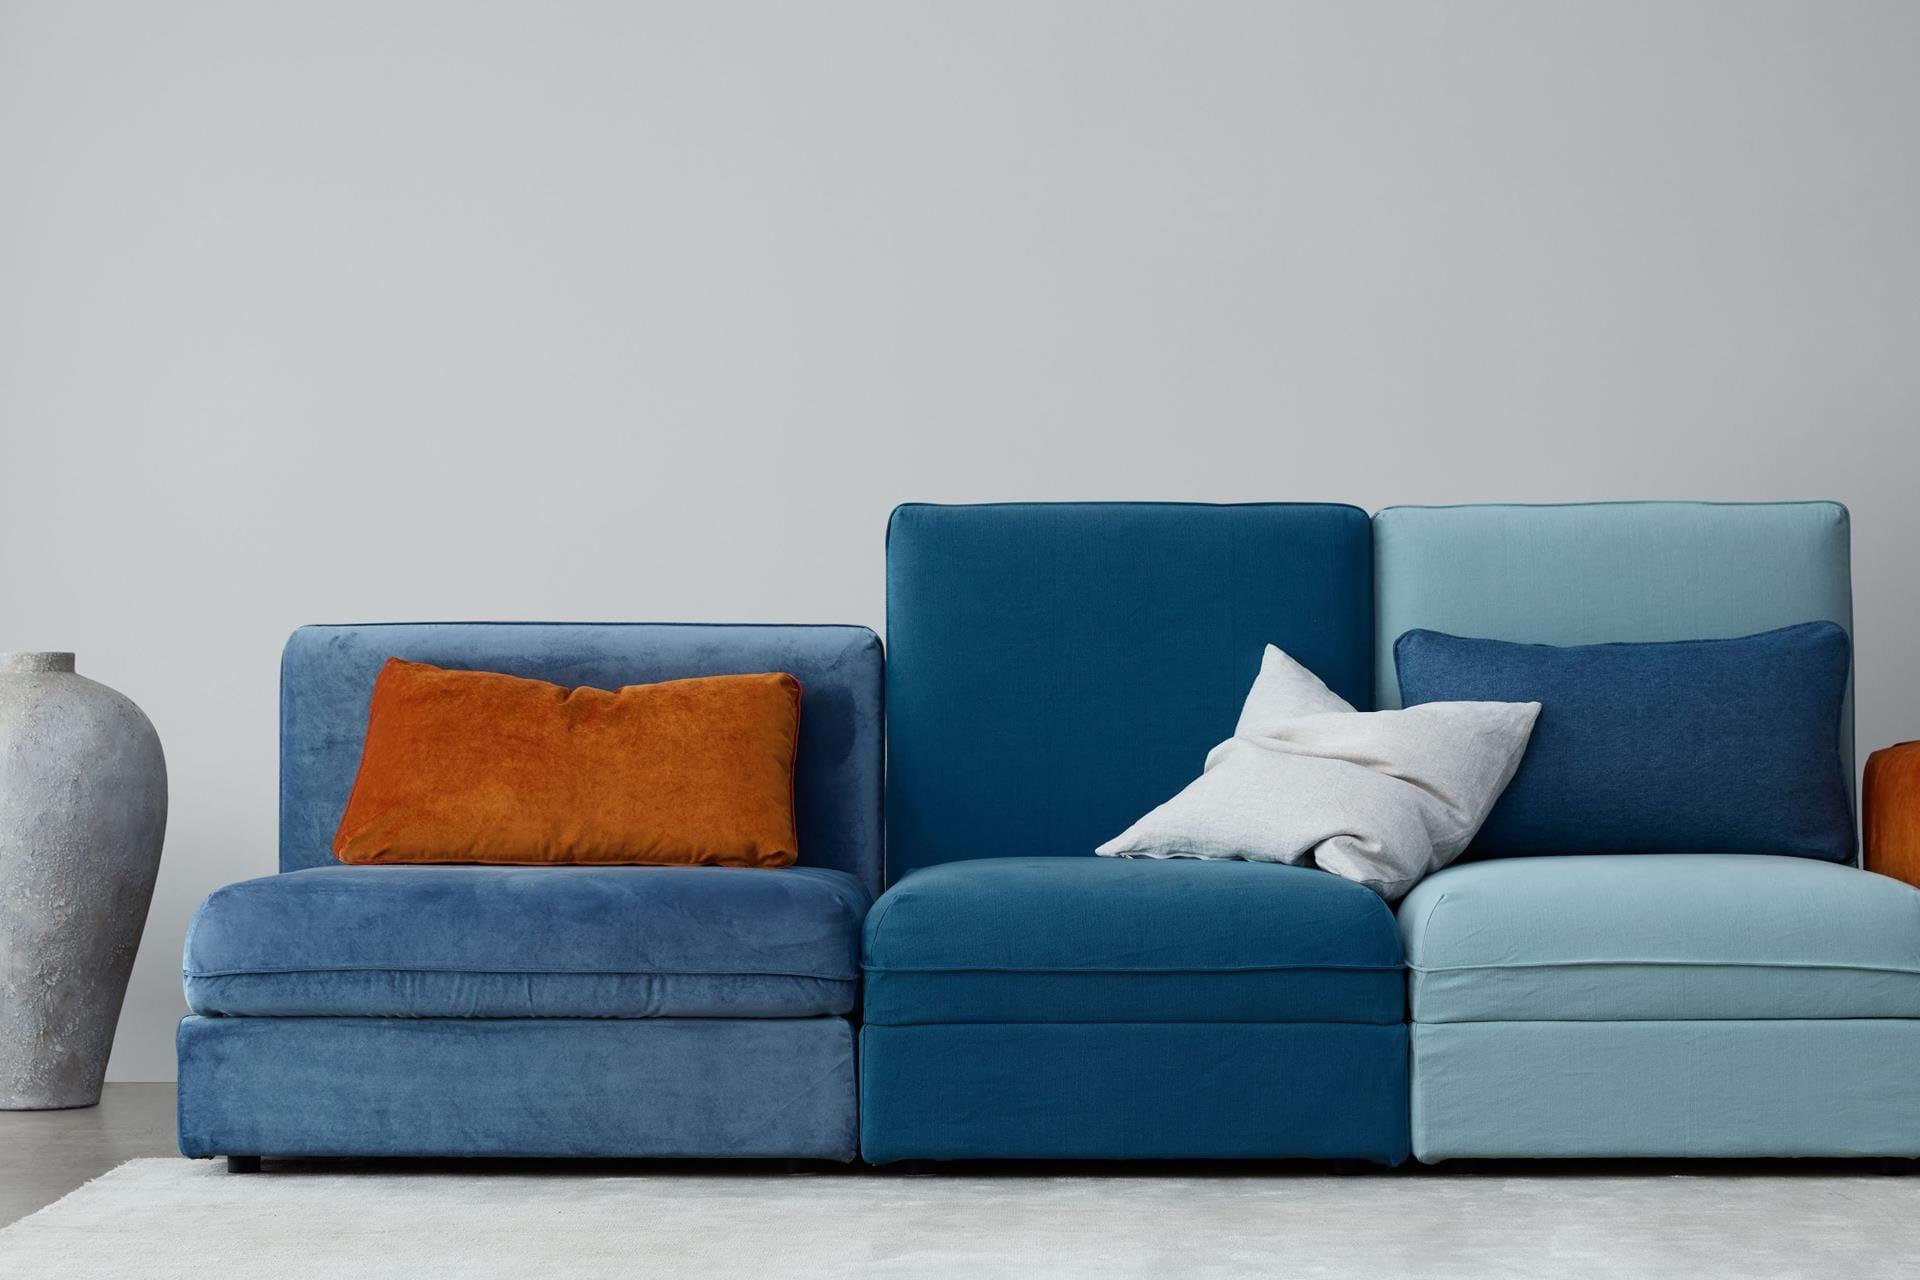 Vallentuna Sofa Review And Why We